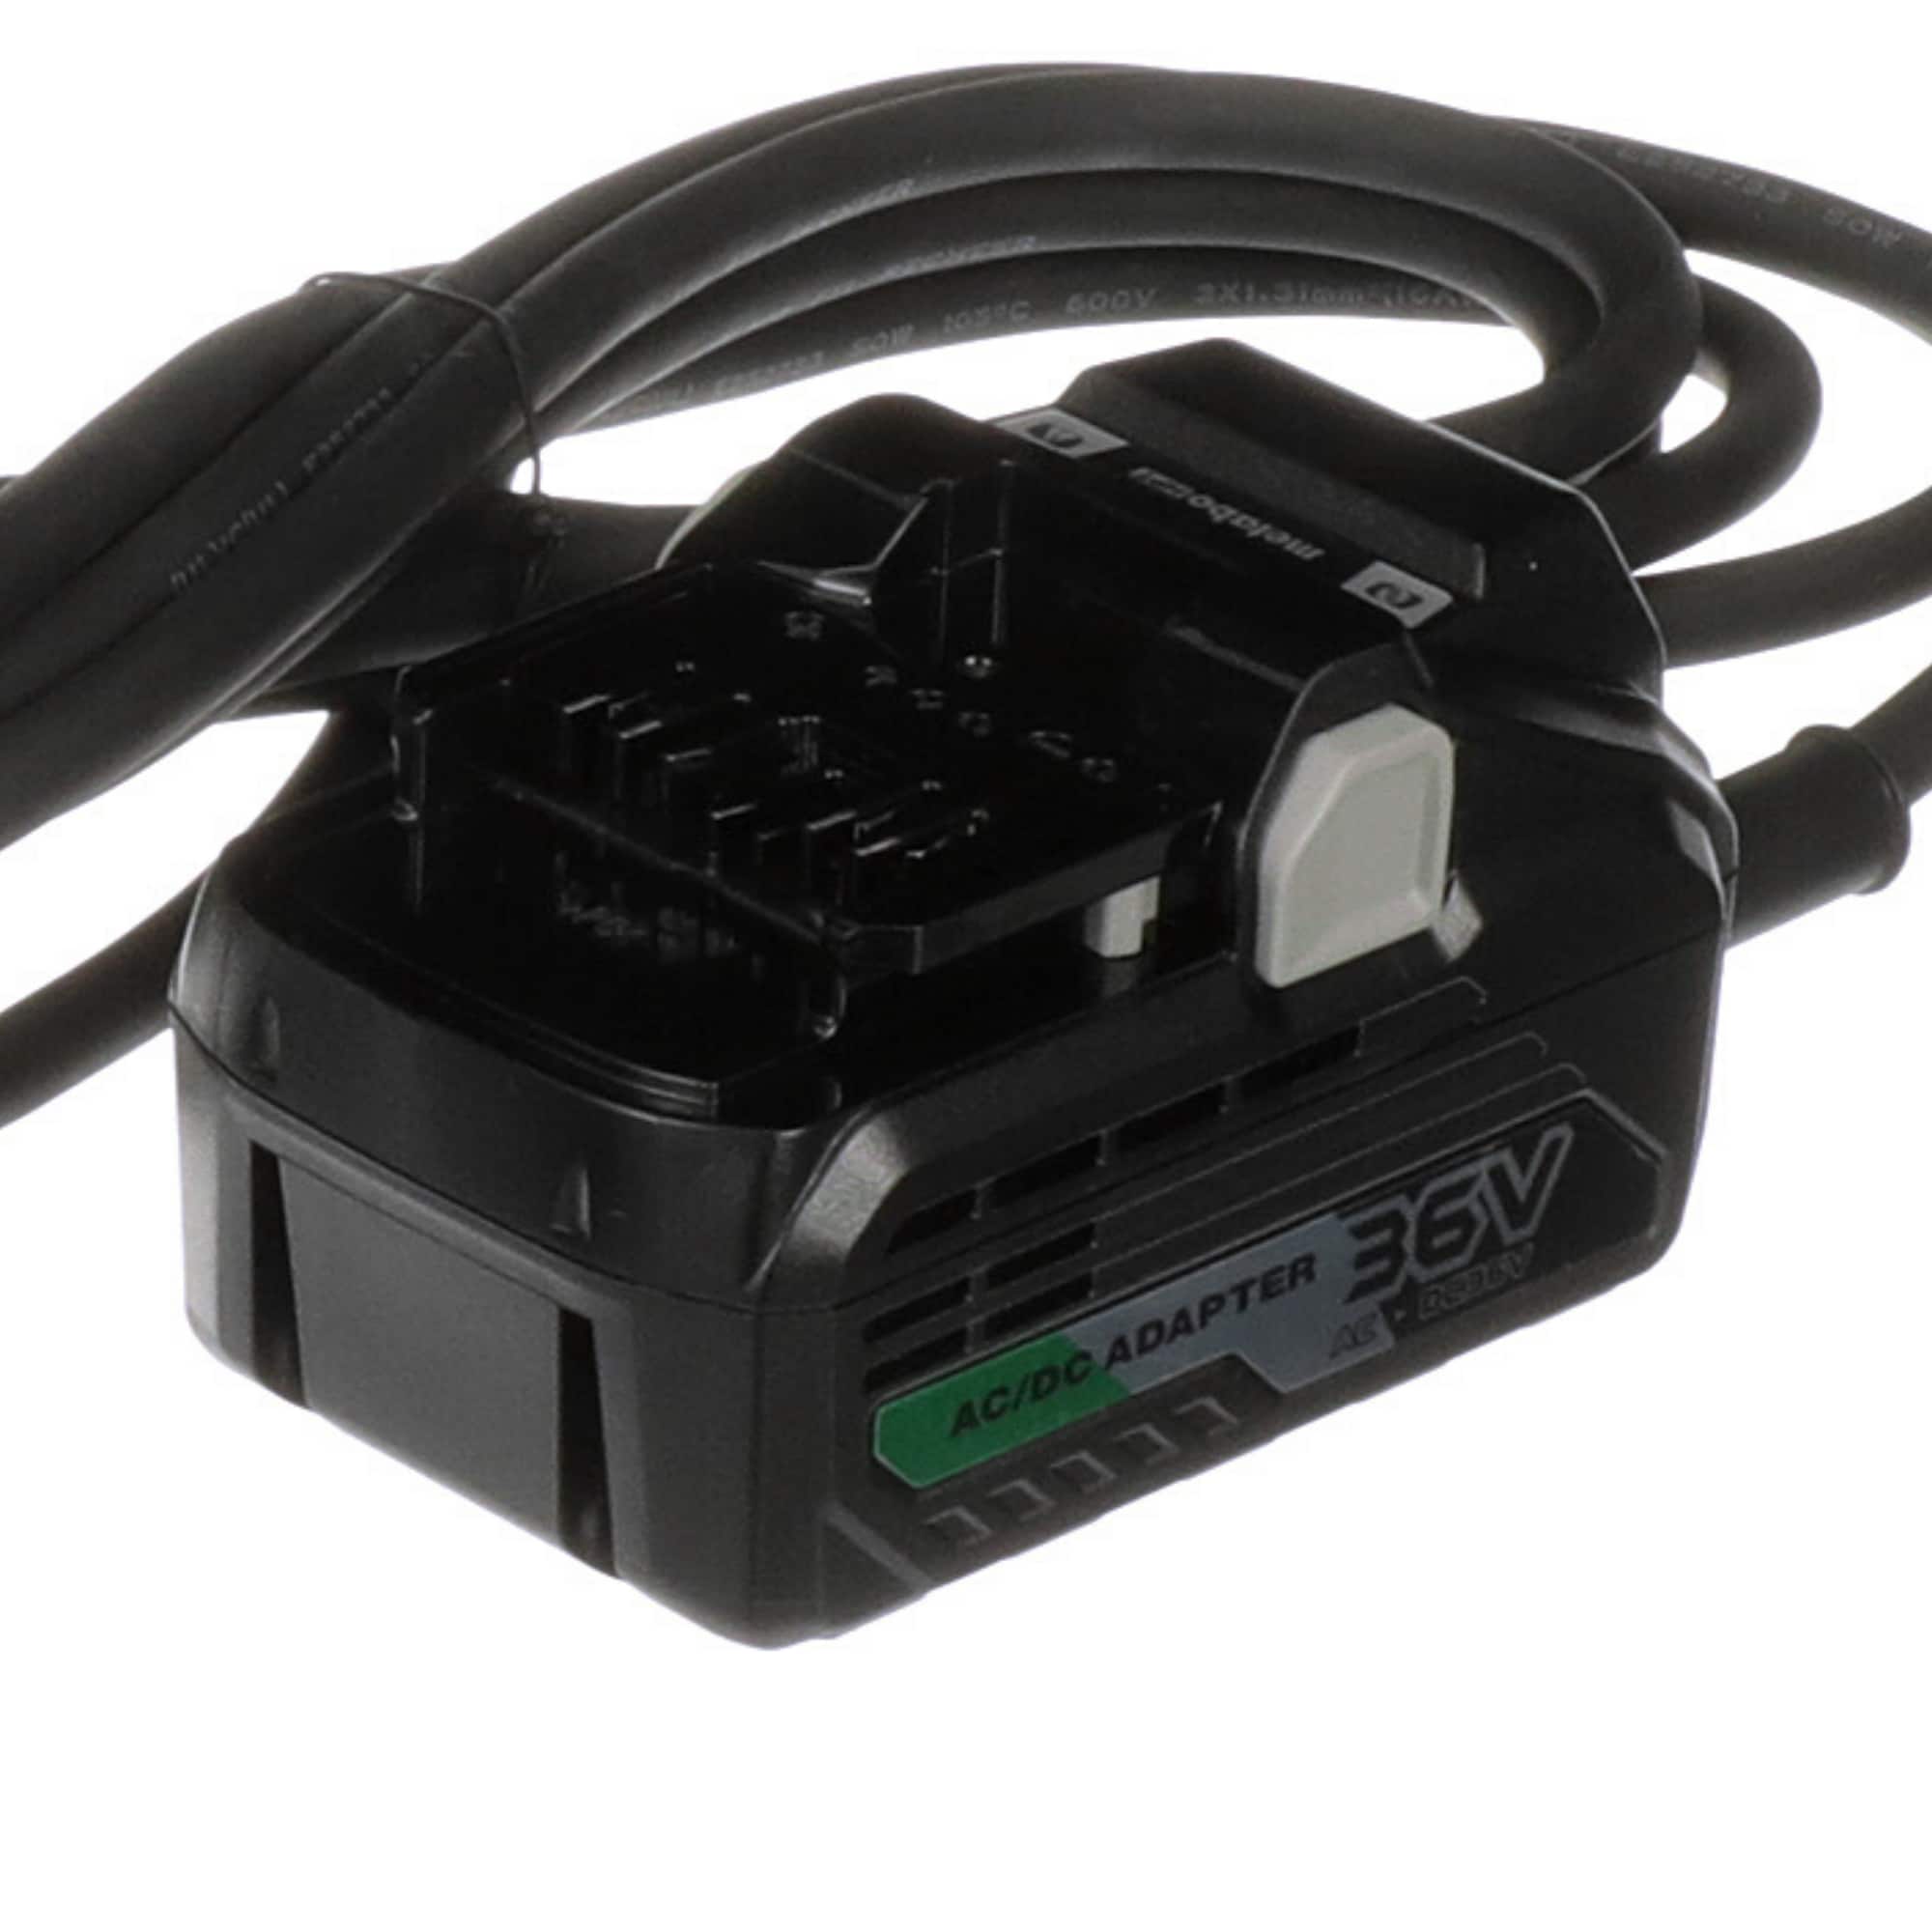 Metabo HPT MultiVolt AC Adapter Power Source Option for All 36V Metabo HPT MultiVolt Tools 20 Ft Pivoting Cord Can Be Used with Generators or Lo - 2